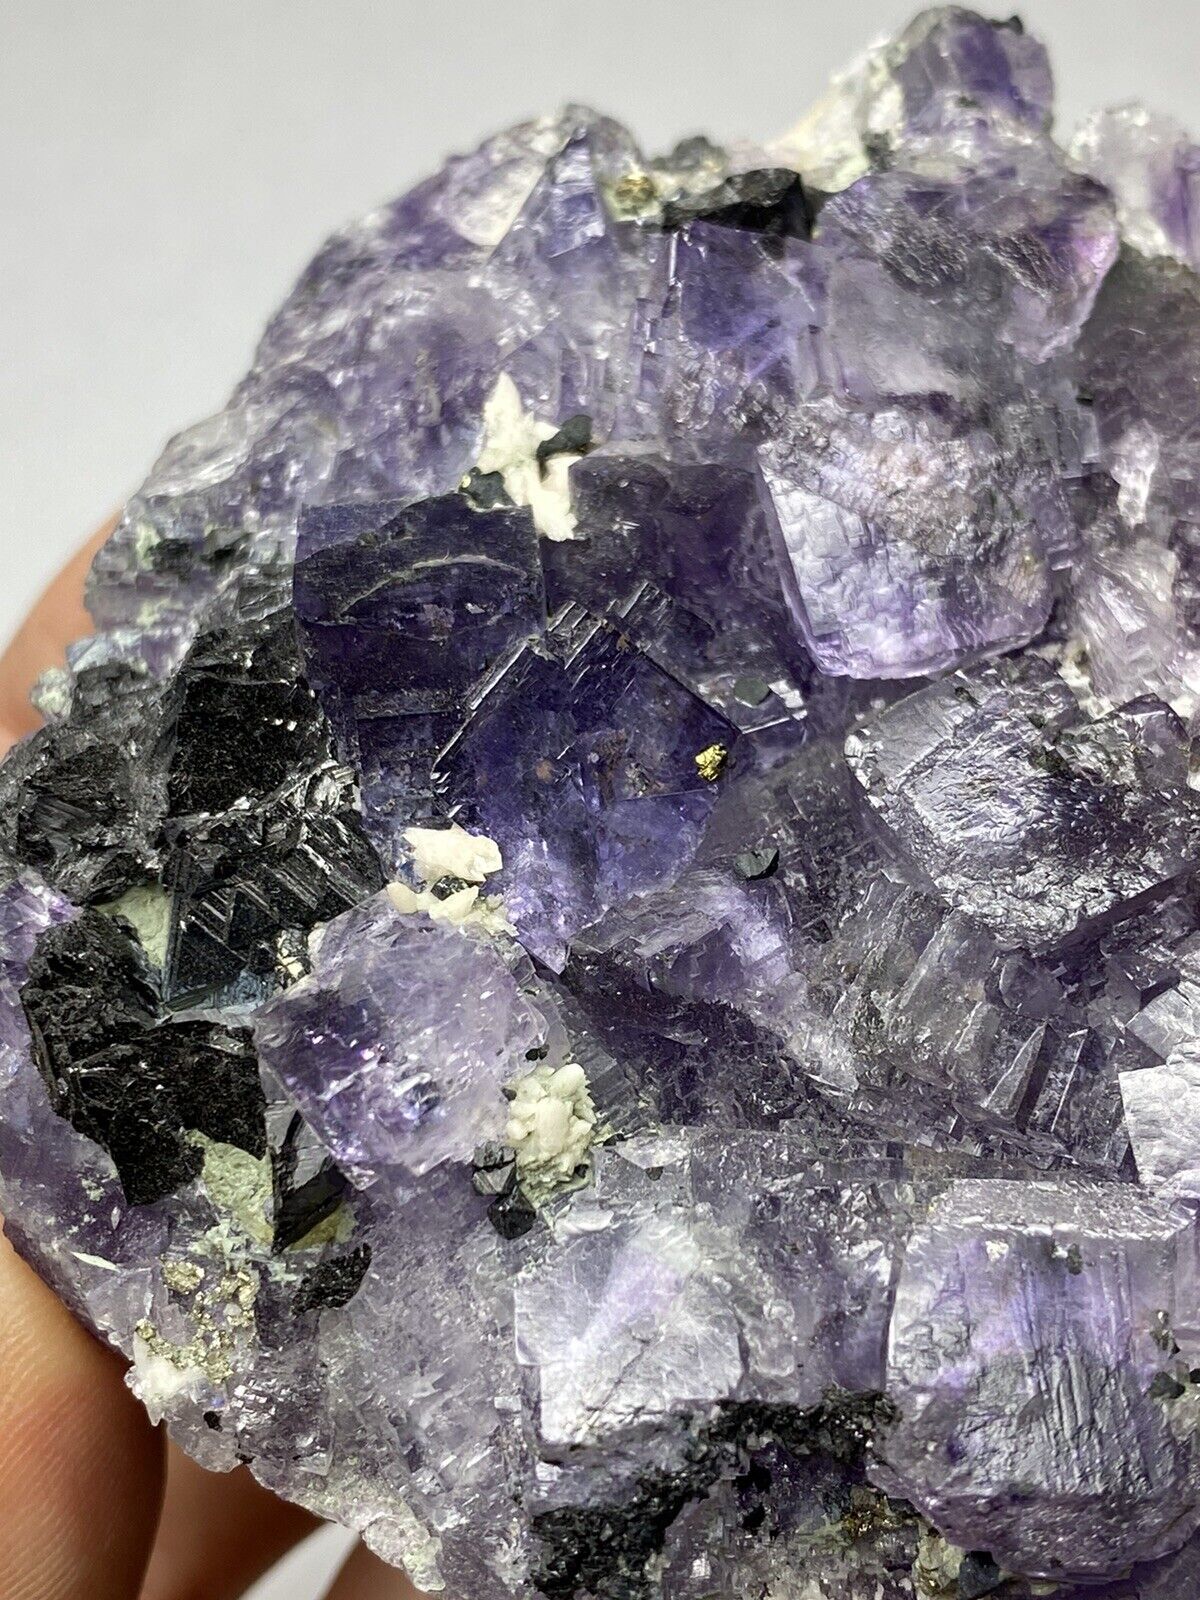 — Etched Purple Fluorite With Sphalerite, Calcite, And Pyrite— Dal’negorsk